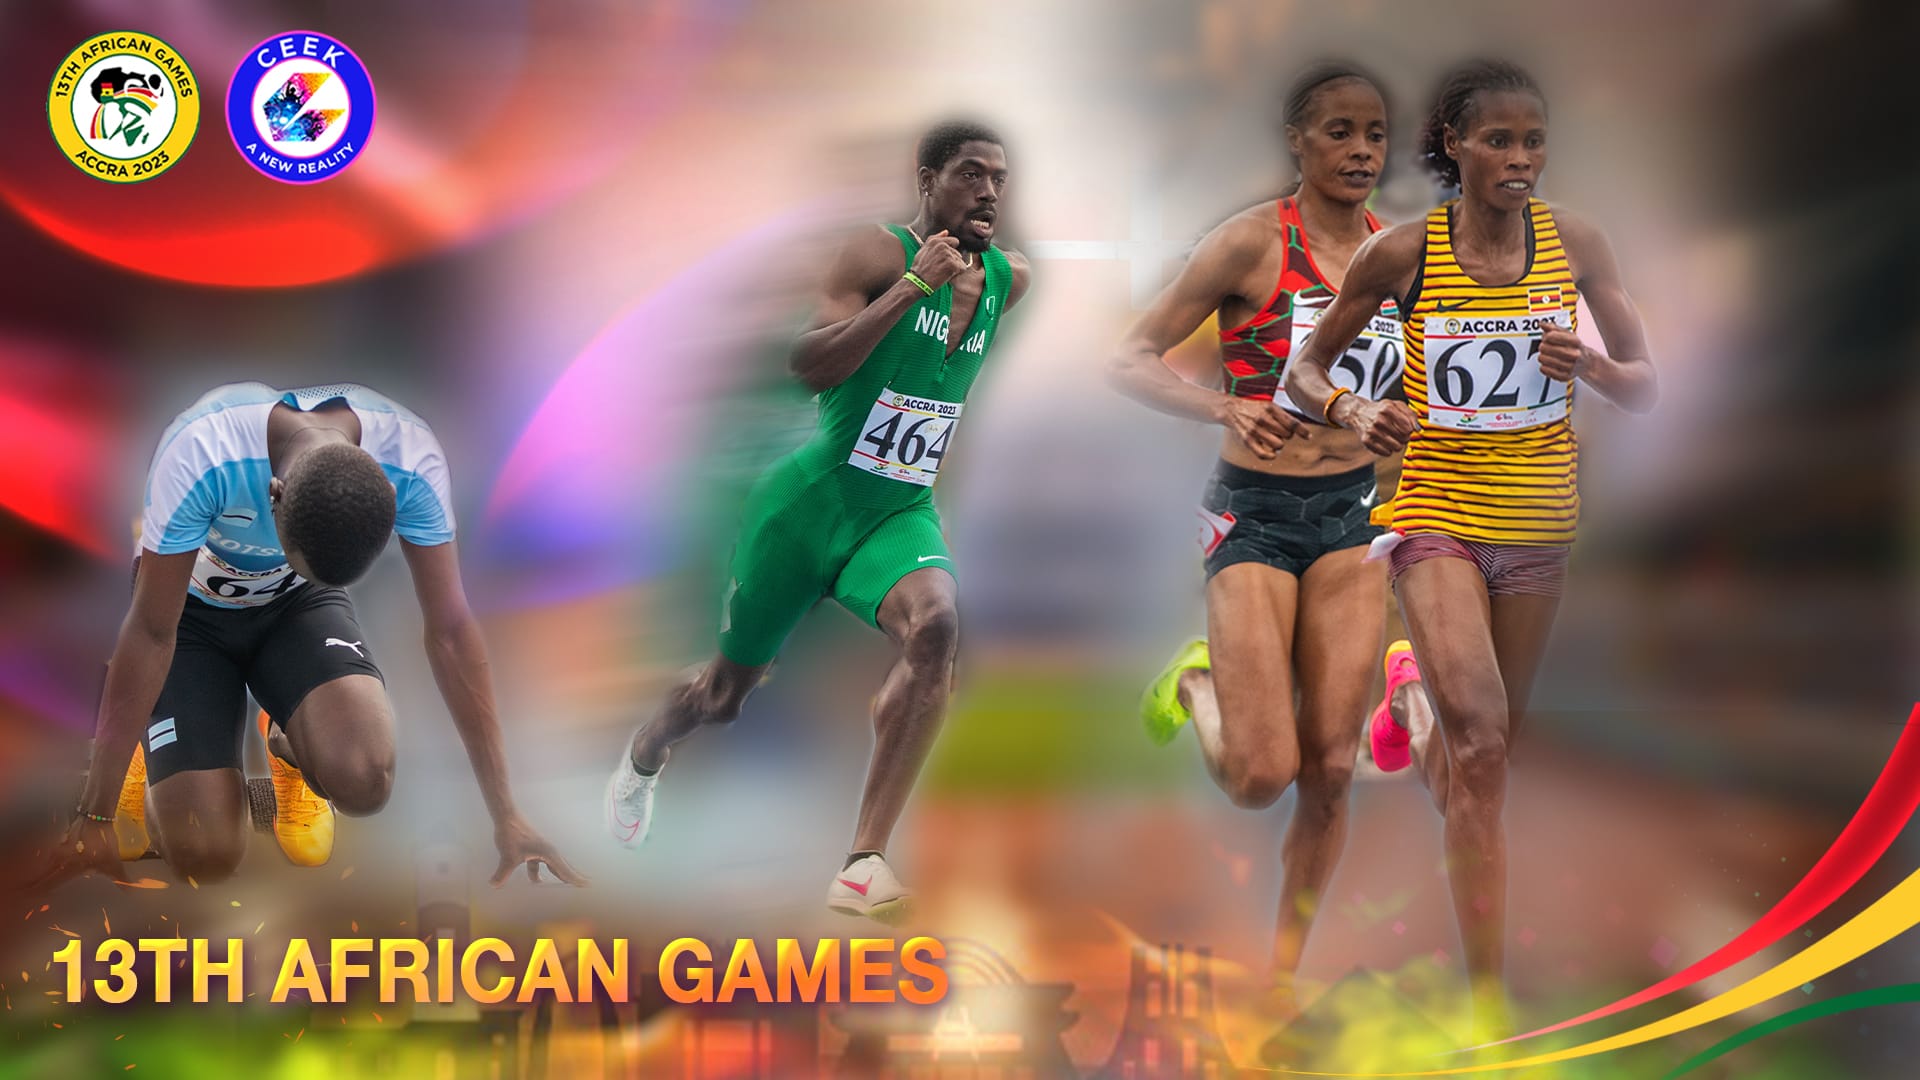 African Games Accra